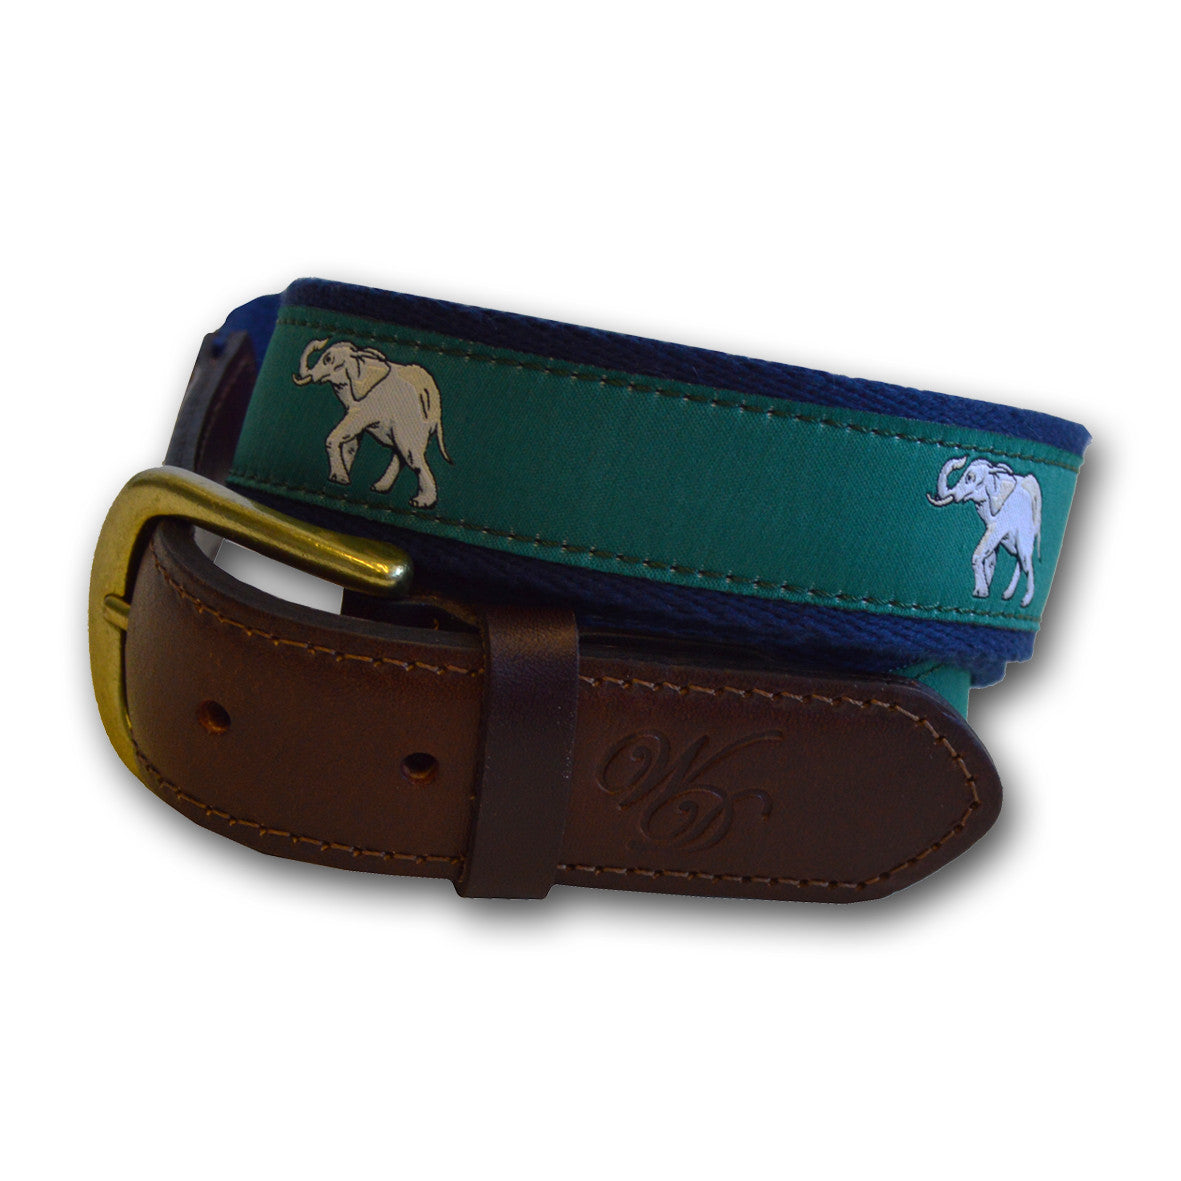 Mens Elephant Canvas and Leather Belt by Wingfield Digby